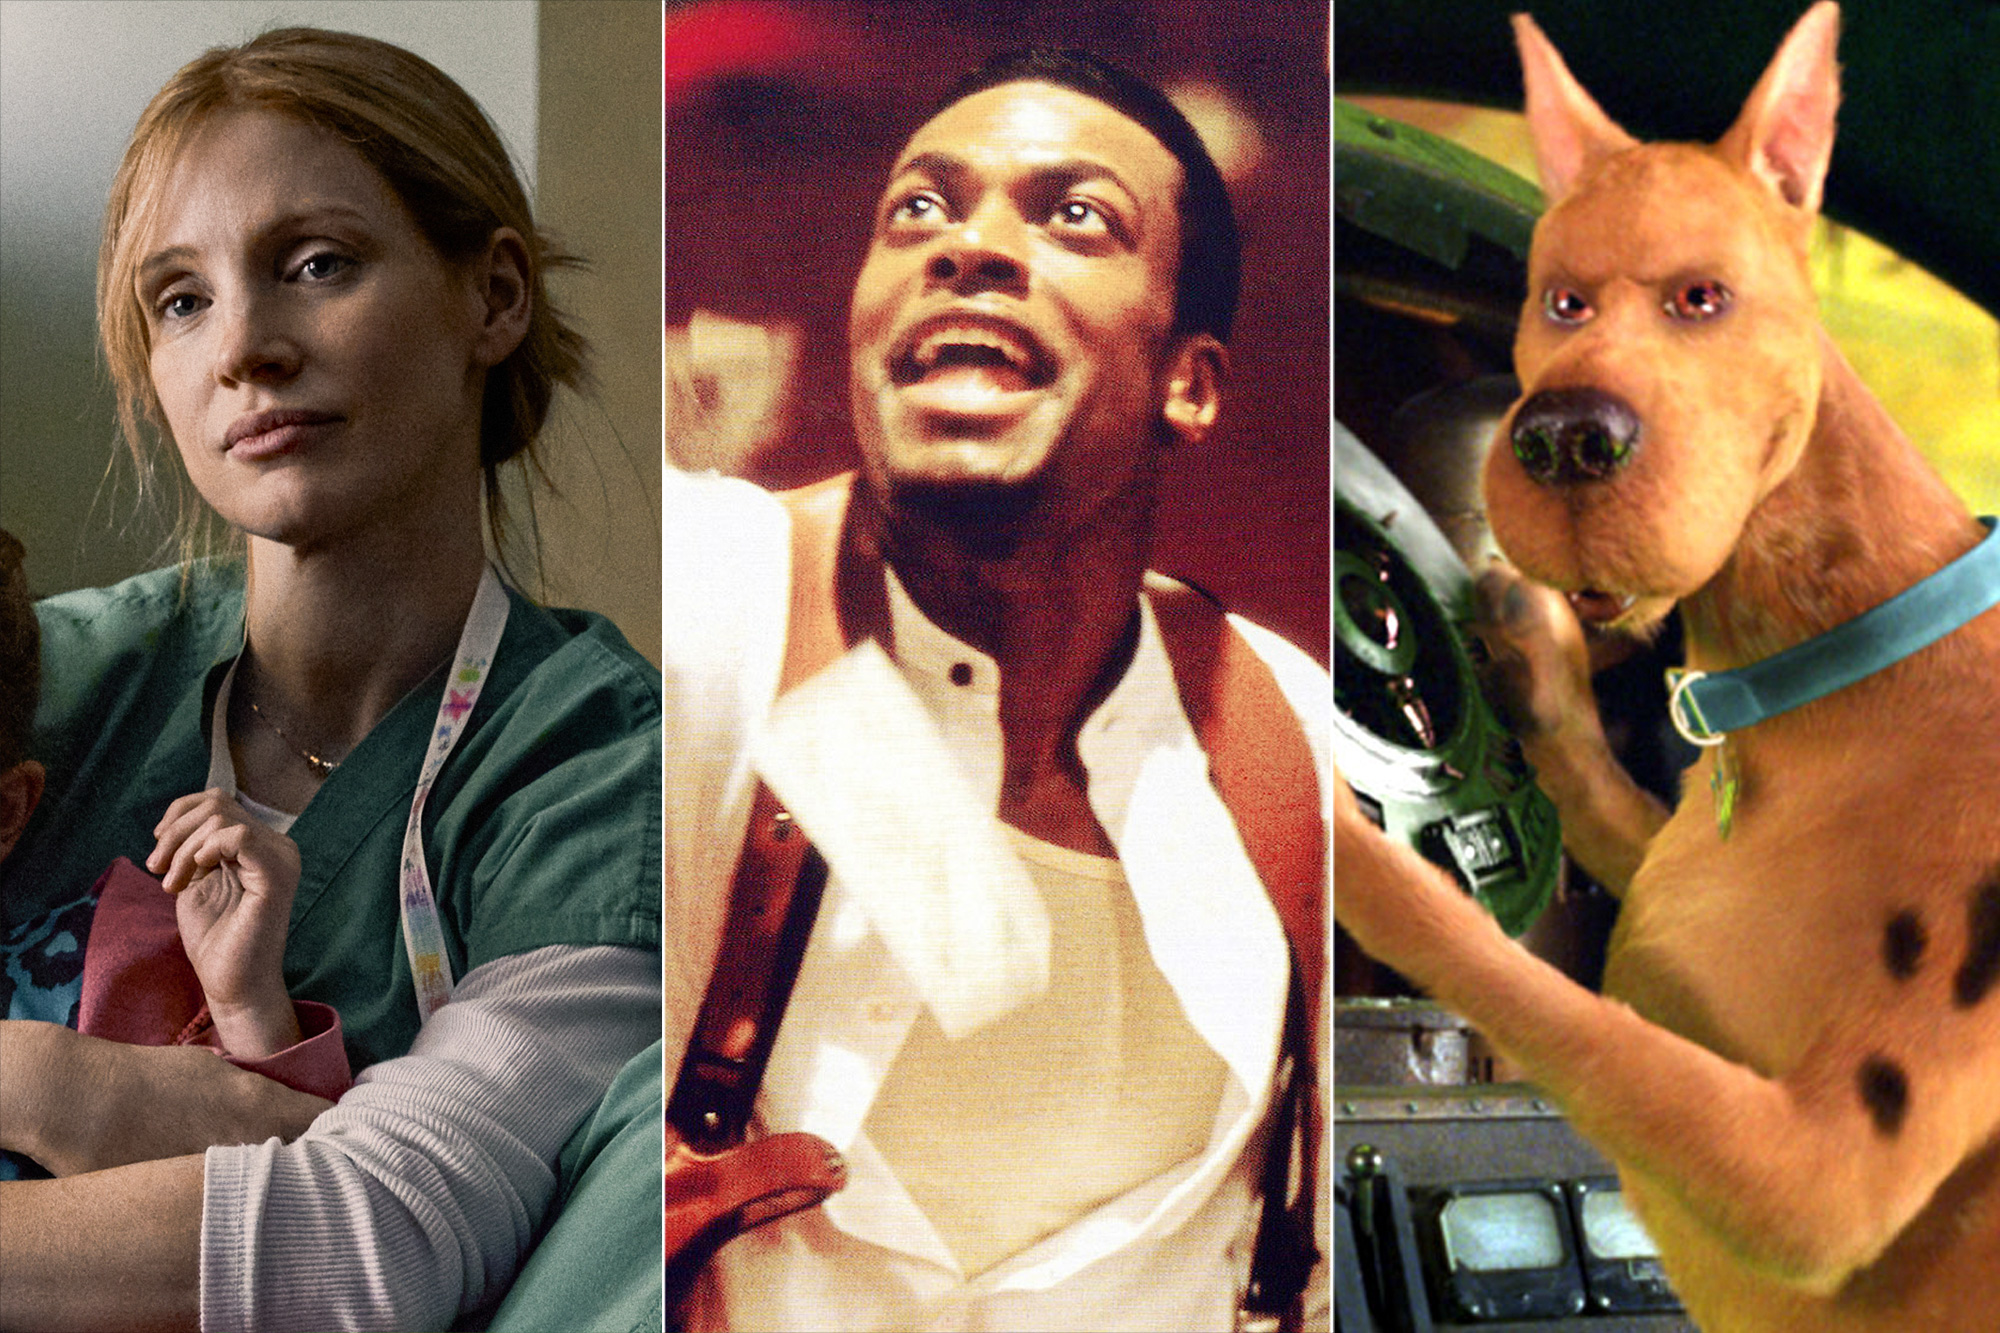 The Good Nurse, RUSH HOUR, SCOOBY-DOO 2: MONSTERS UNLEASHED